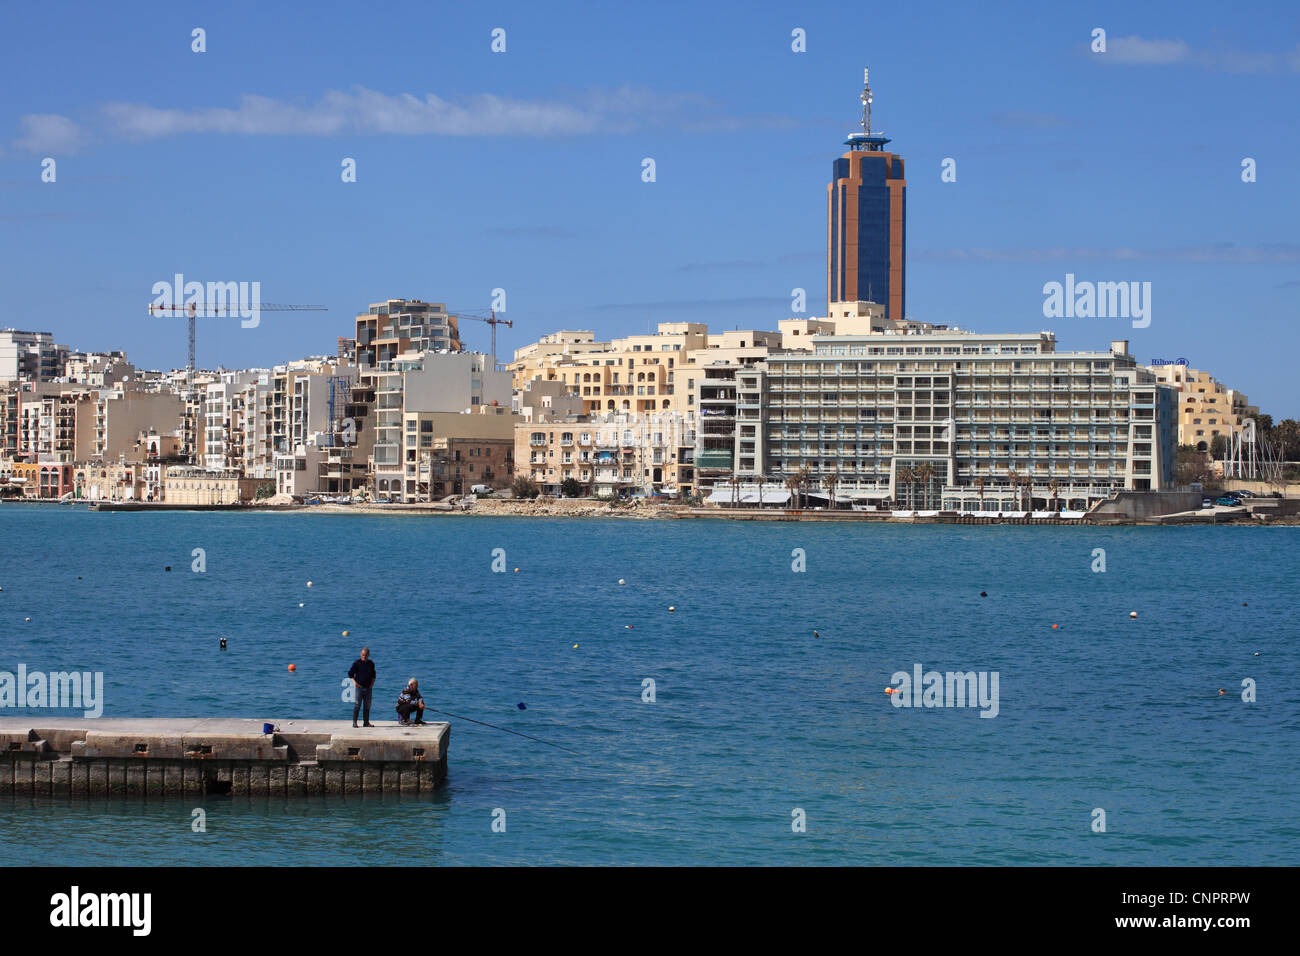 Two men fishing at St Julians with Hotel Cavalieris and high rise Portomaso tower  in the background Malta, Europe Stock Photo